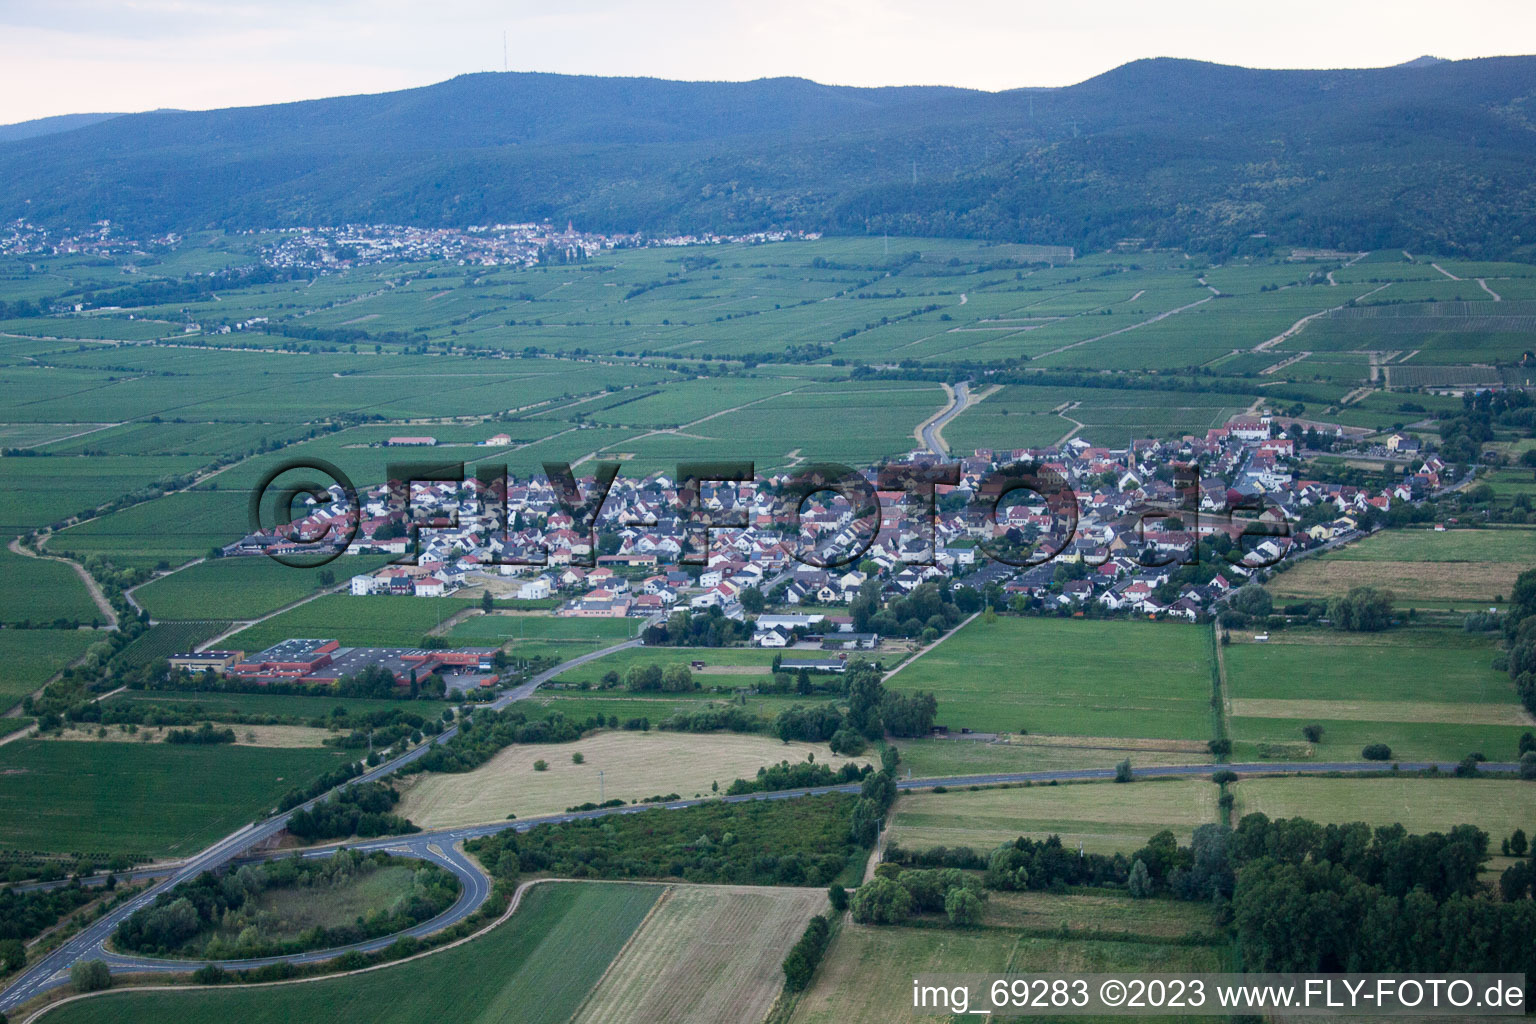 Ruppertsberg in the state Rhineland-Palatinate, Germany seen from above